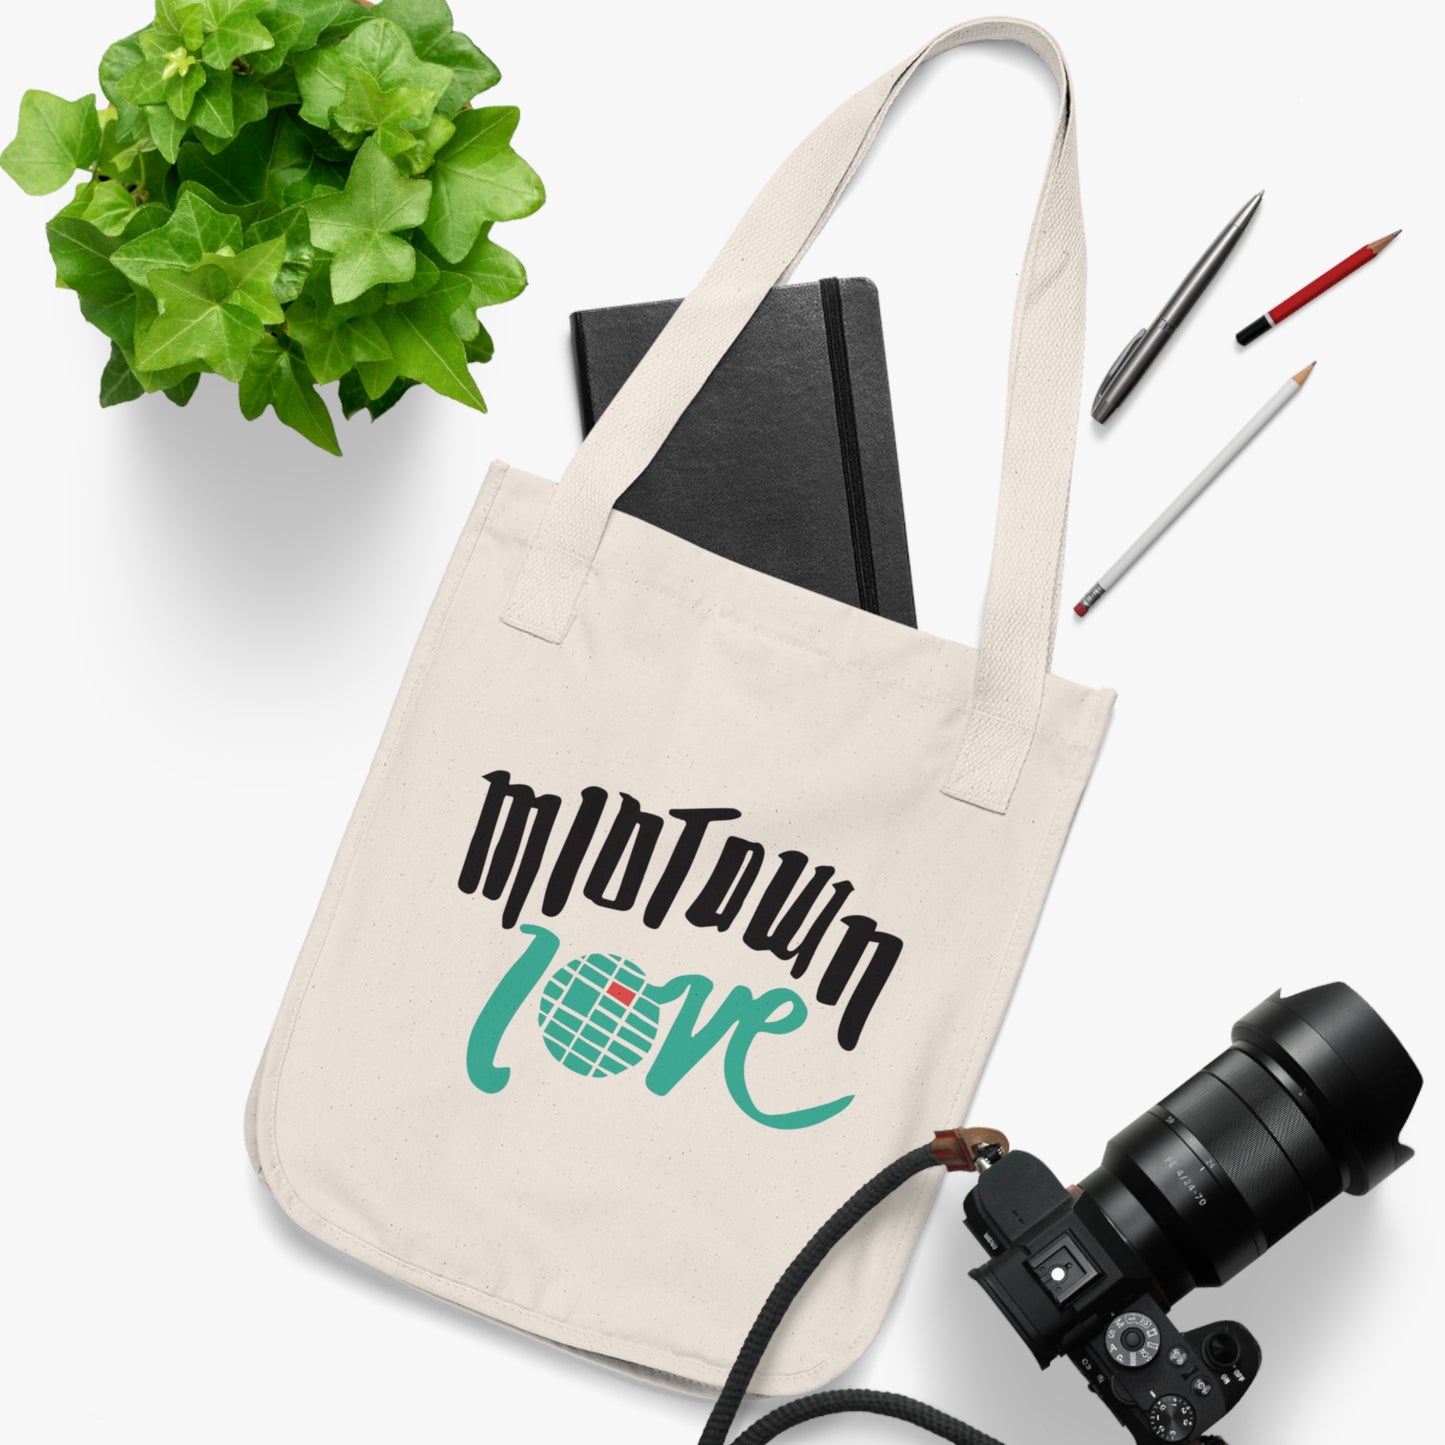 Eco-Friendly Midtown Love Organic Canvas Tote